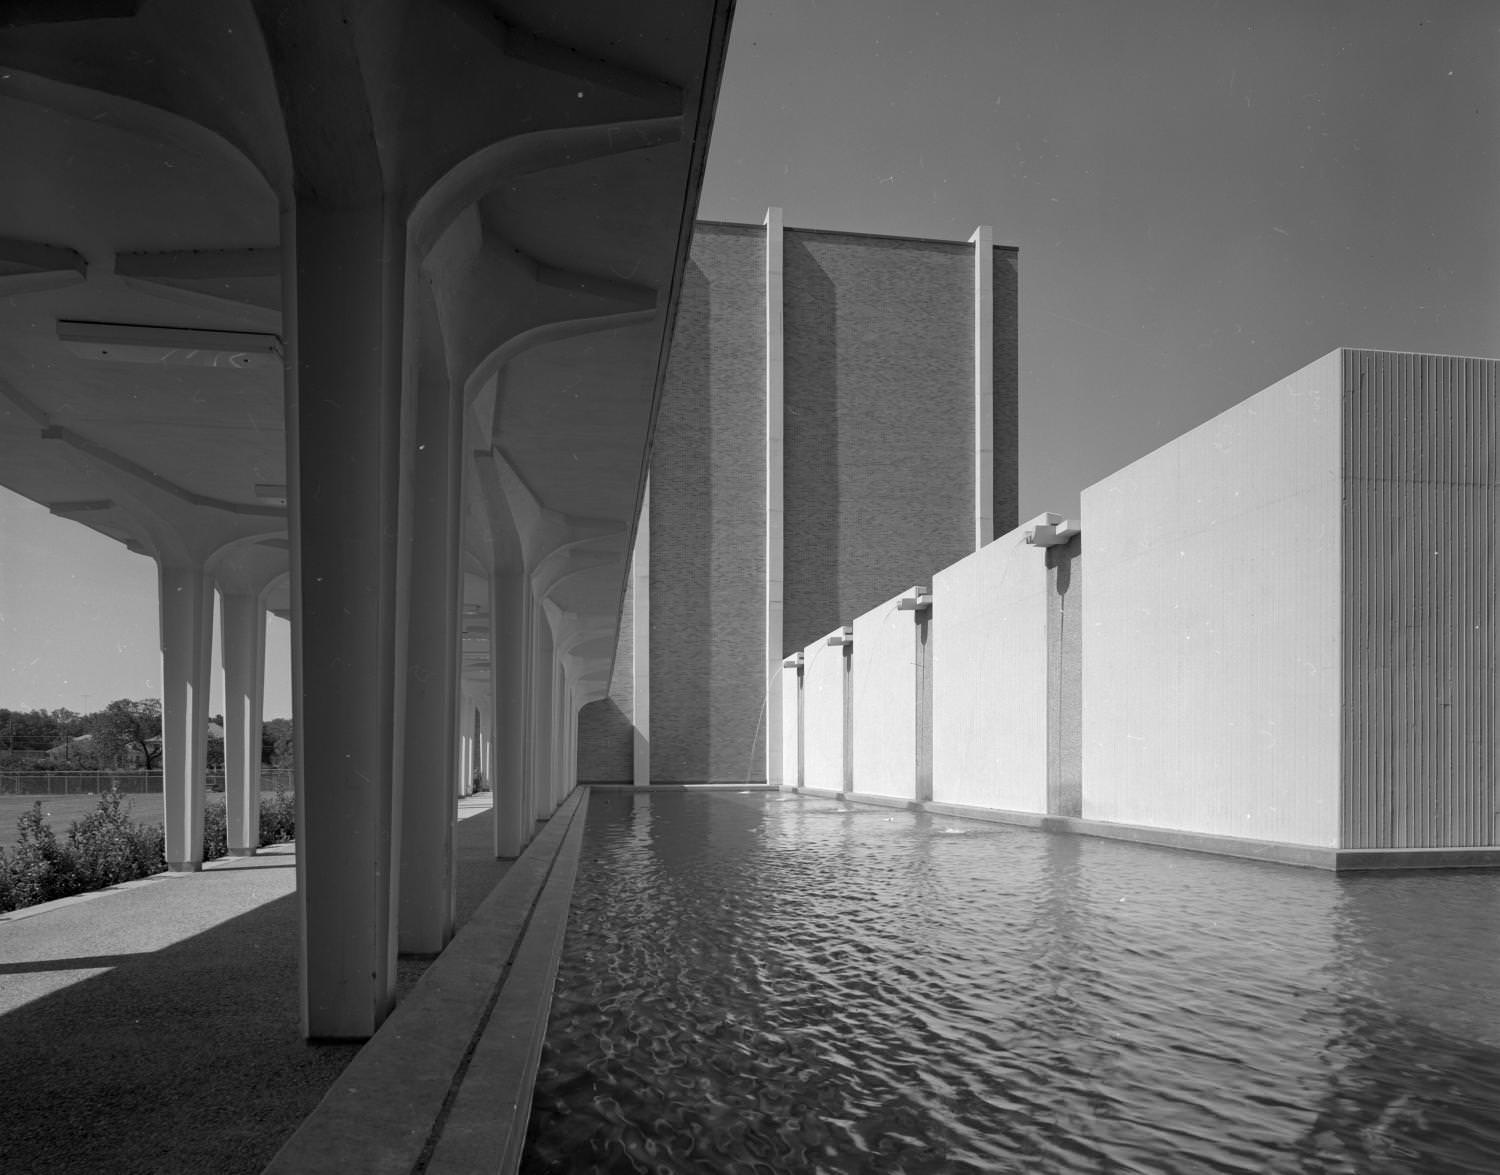 A shallow fountain pool at University of Texas's engineering science building, 1967